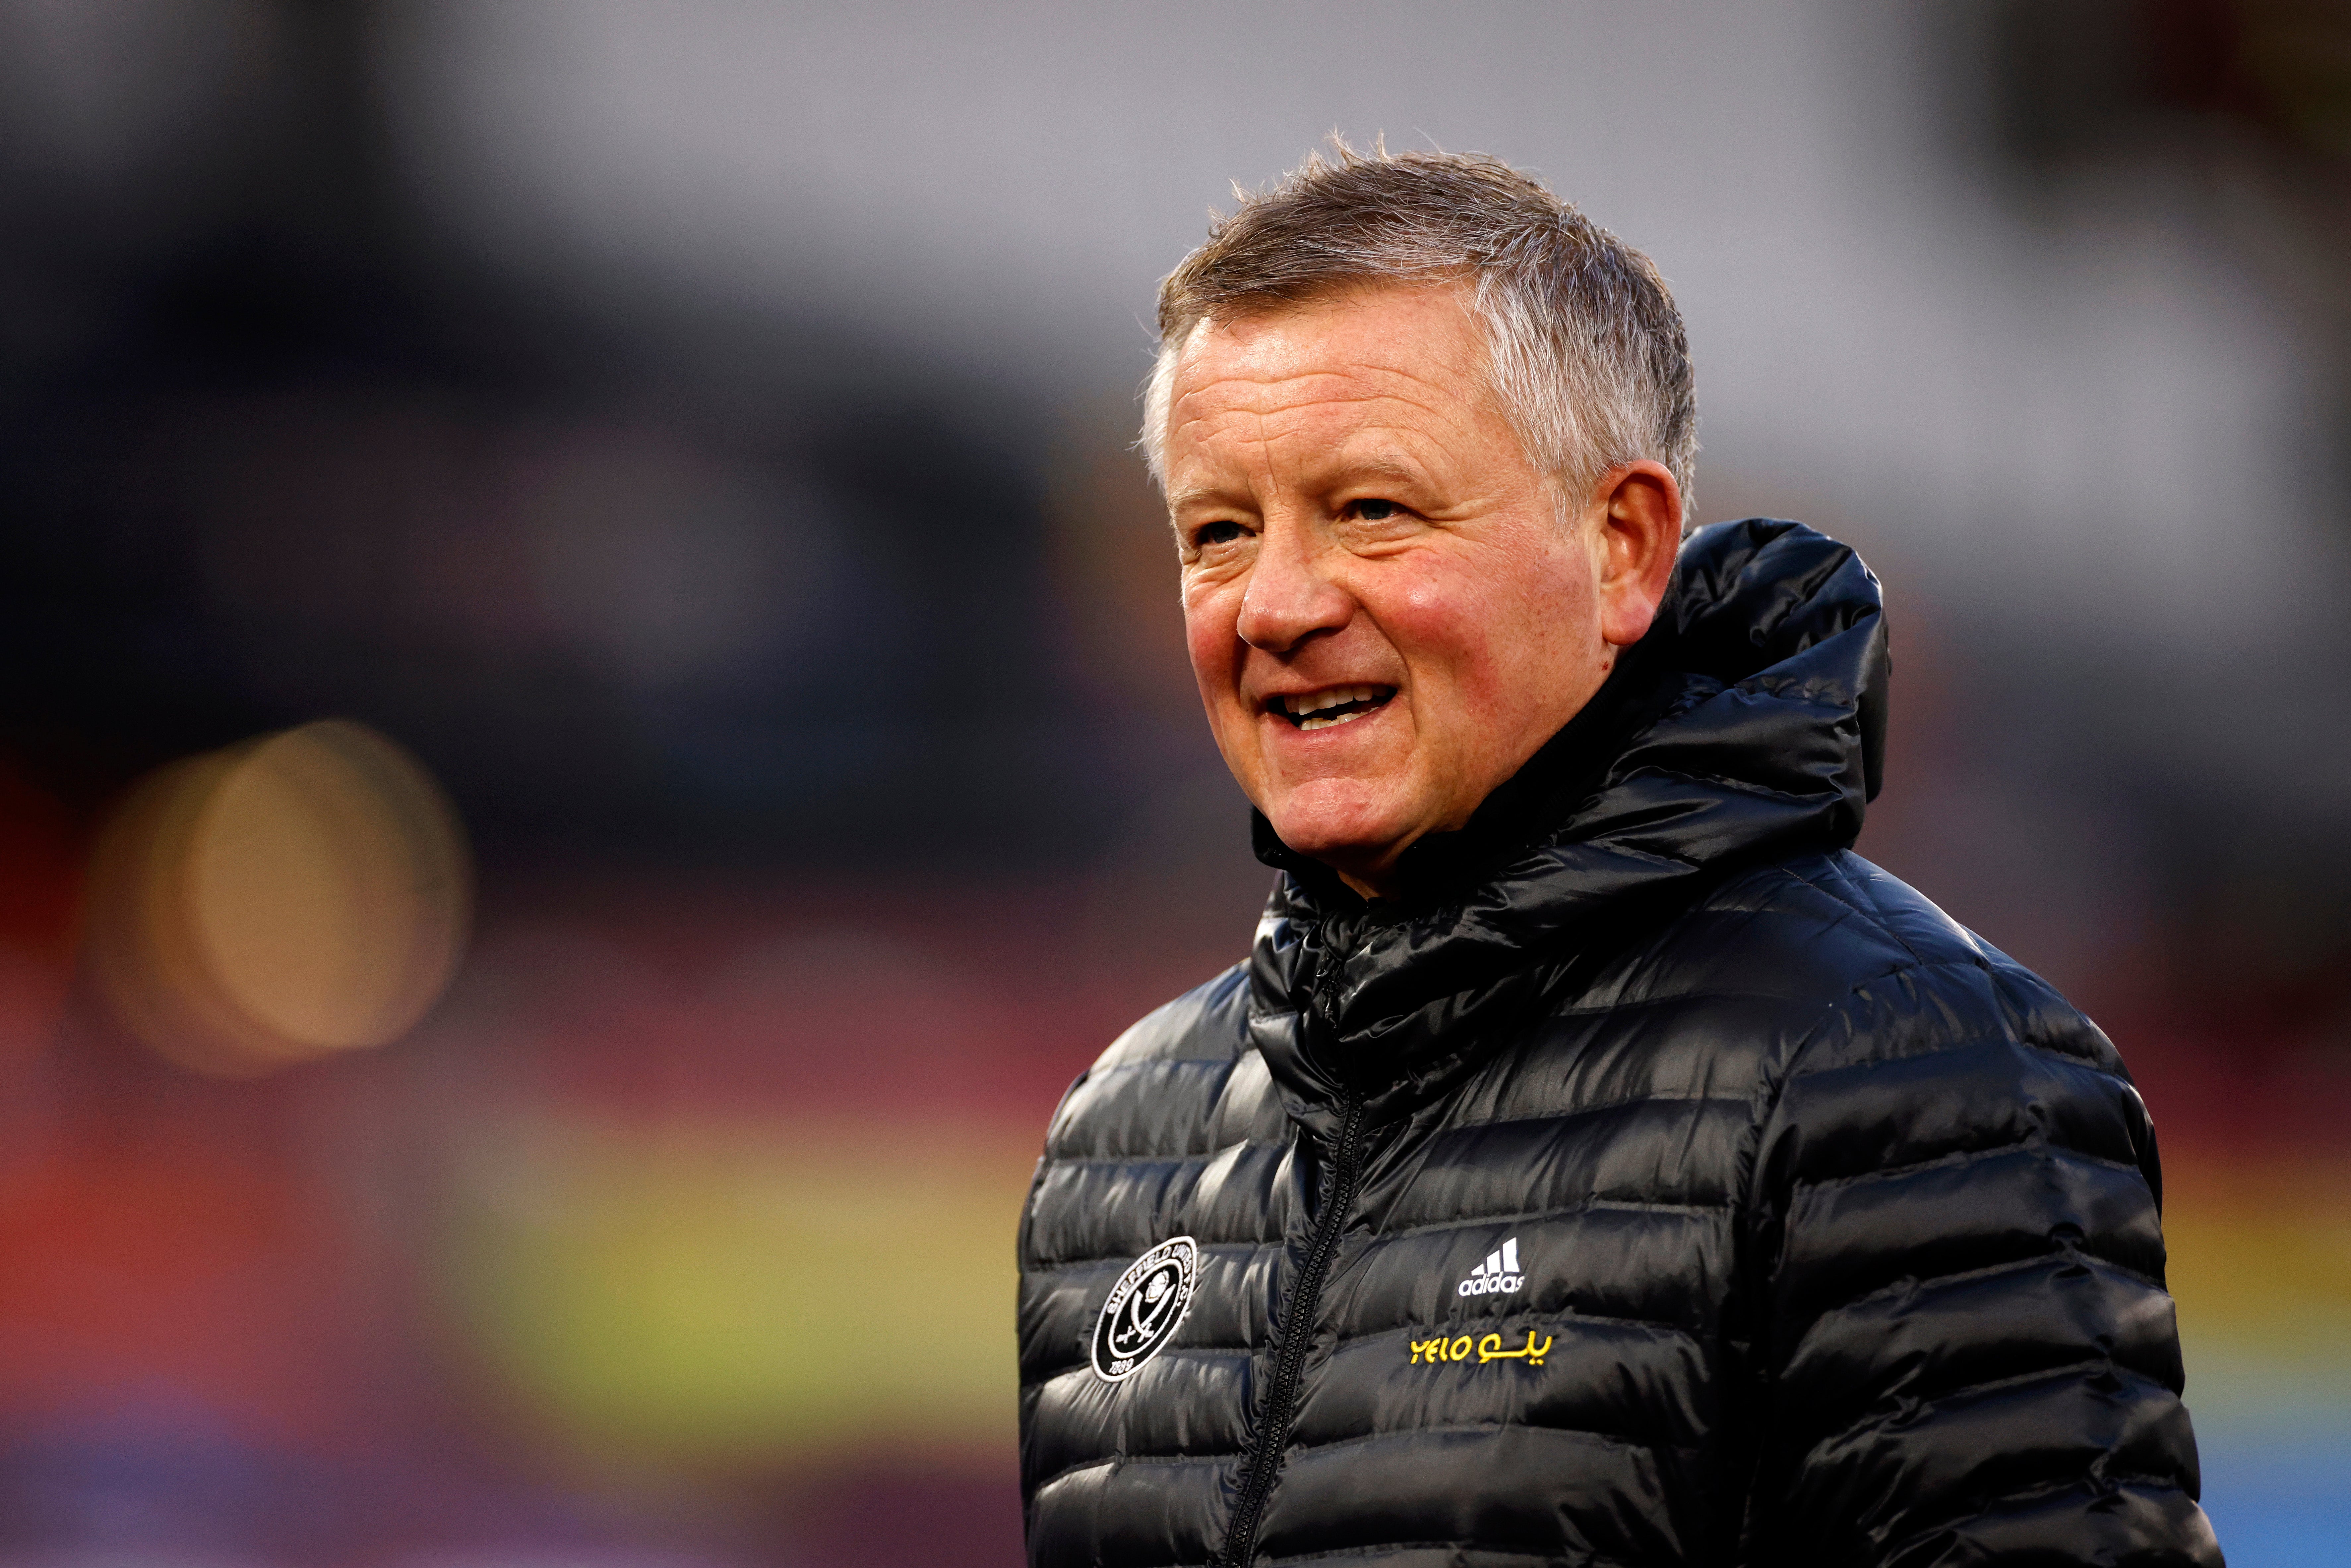 Chris Wilder parted company with Sheffield United this month